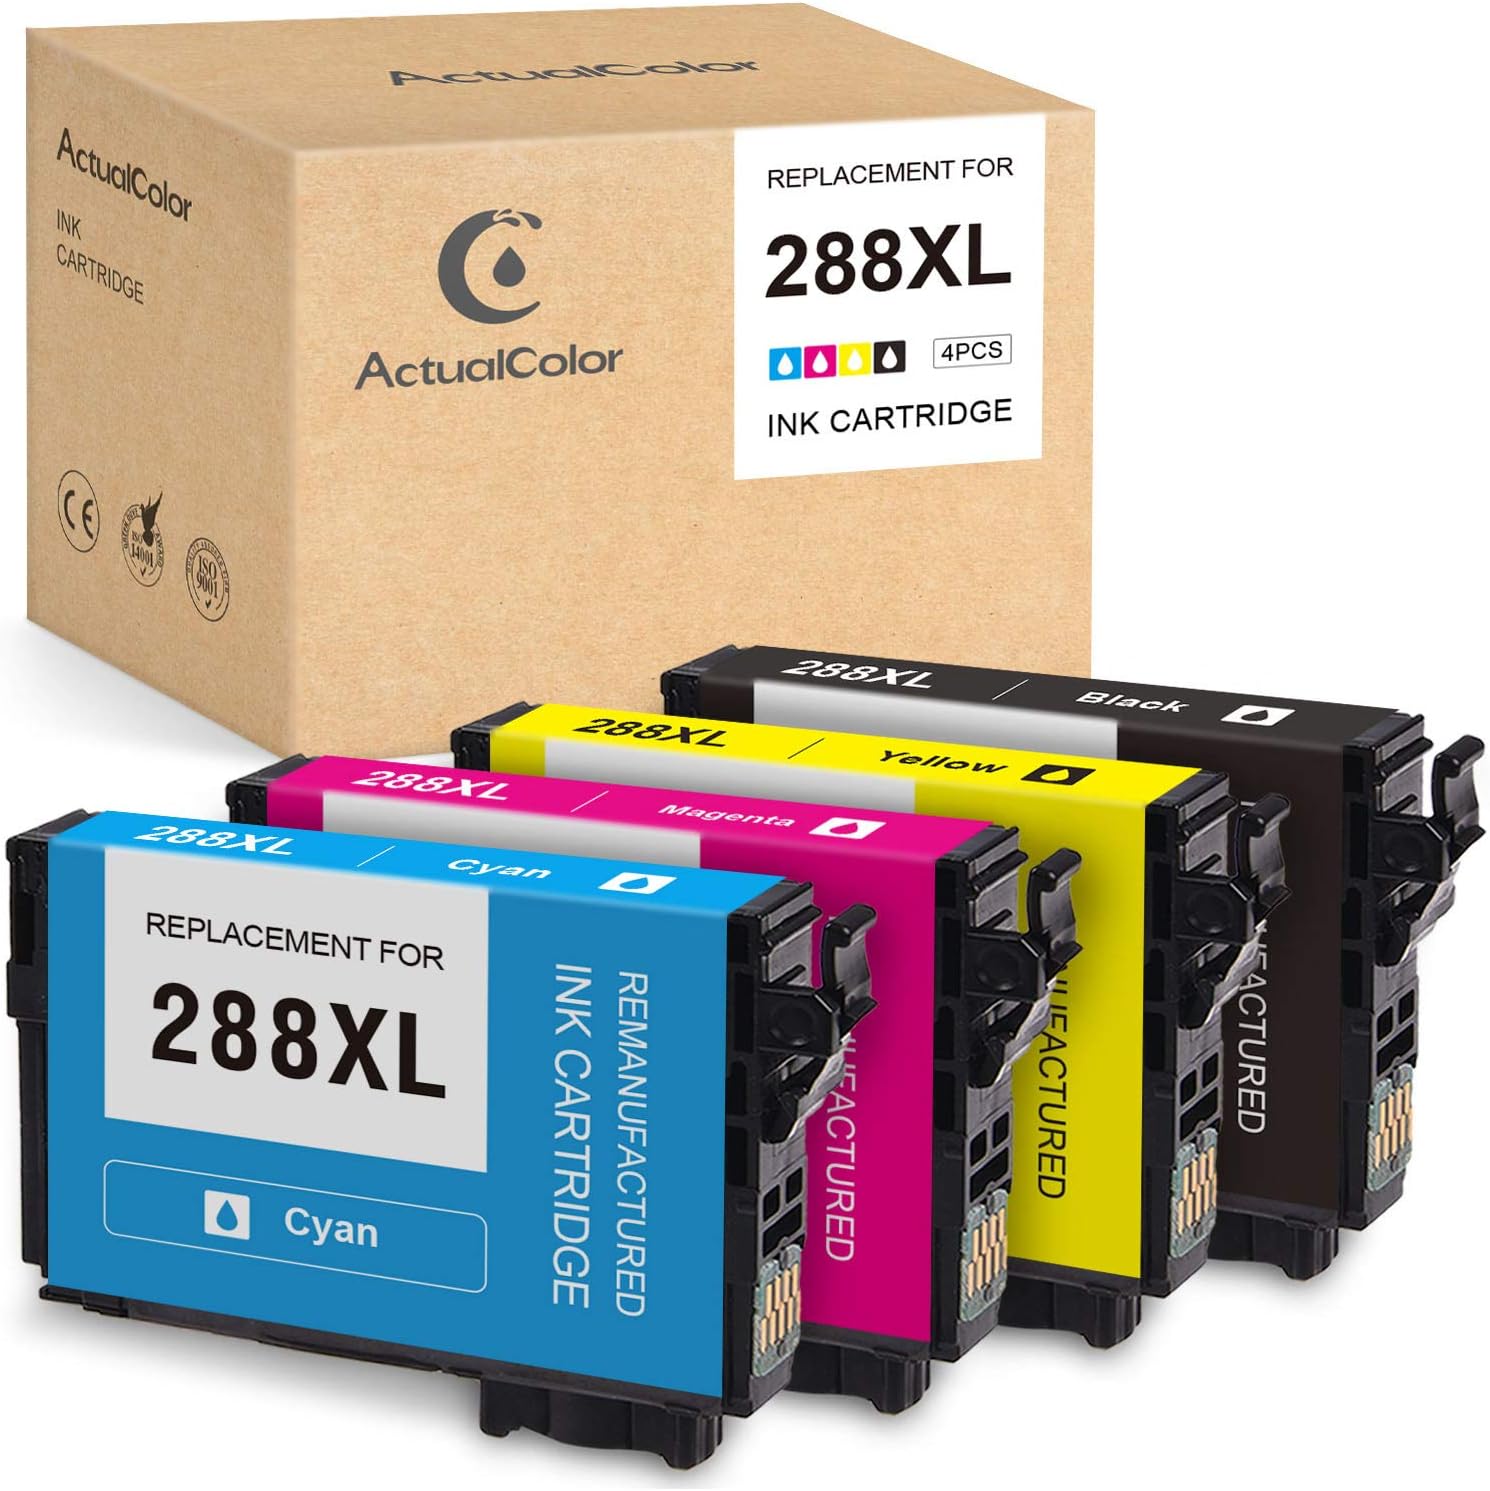 REMANUFACTURED 288 XL Ink Cartridge For E pson Expression XP440 XP434 XP446 330 